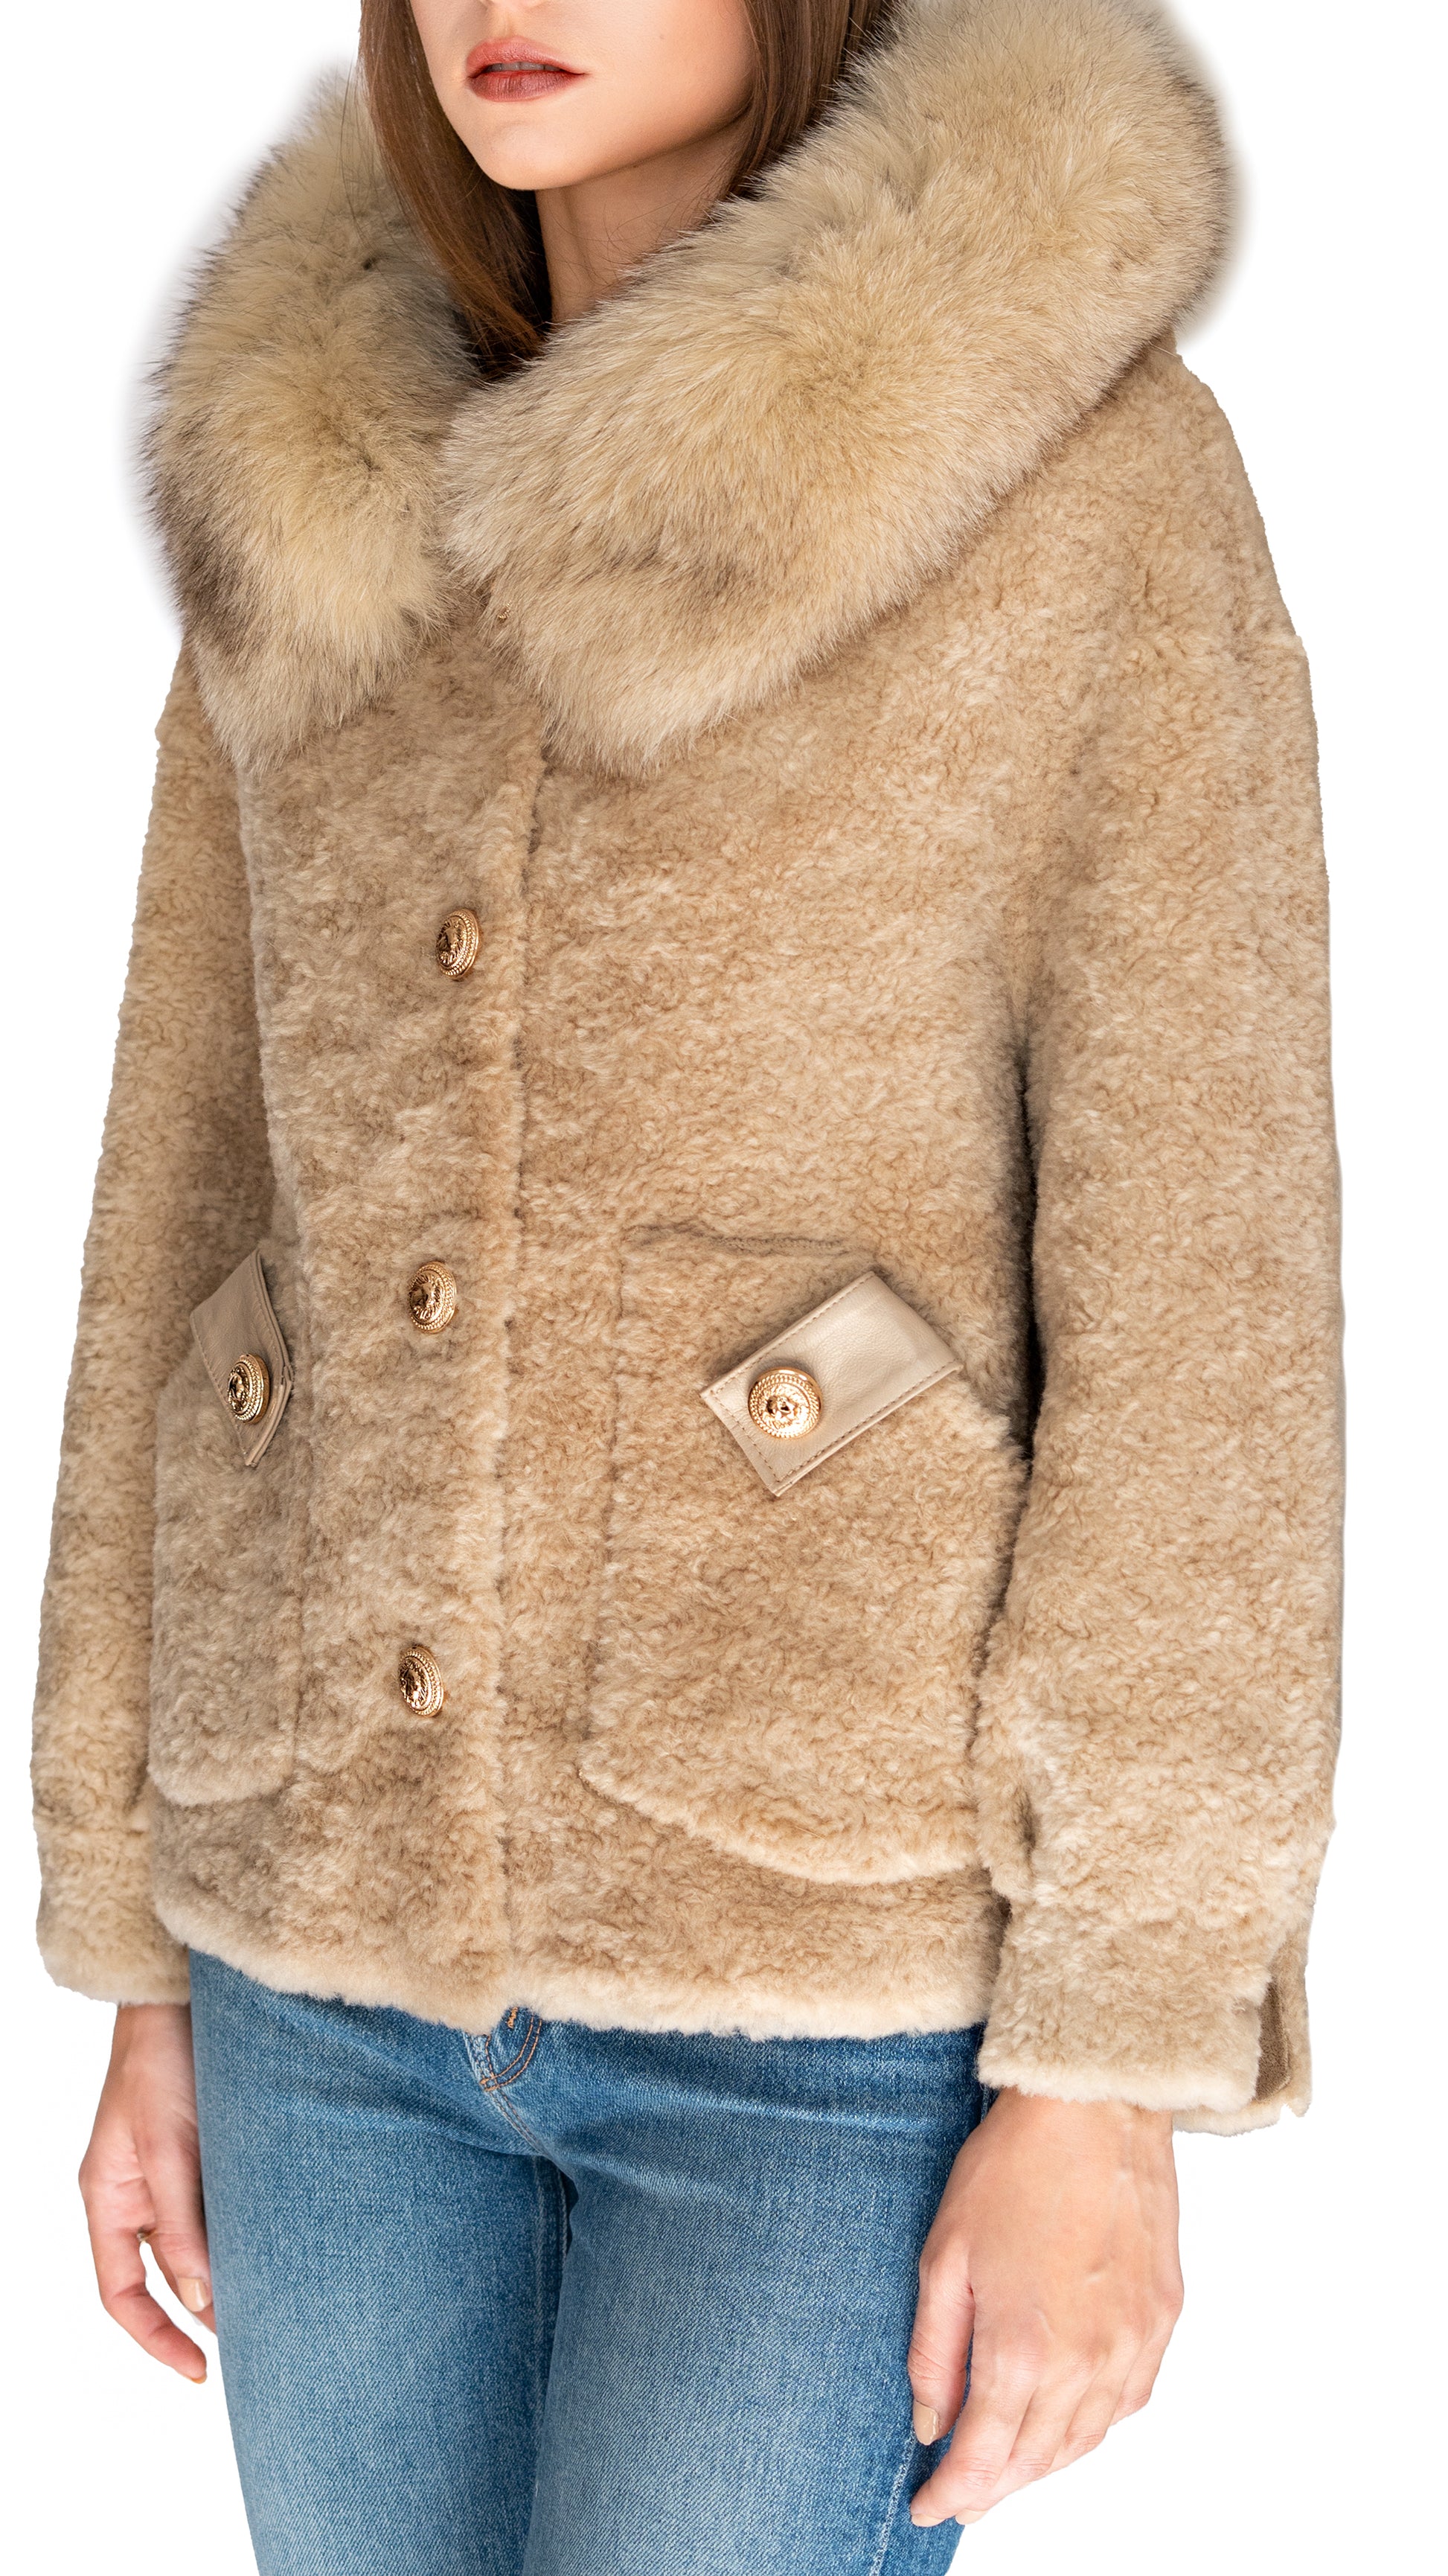 Daniella Erin shearling jacket with gold buttons and fur trimmed hood in oat color